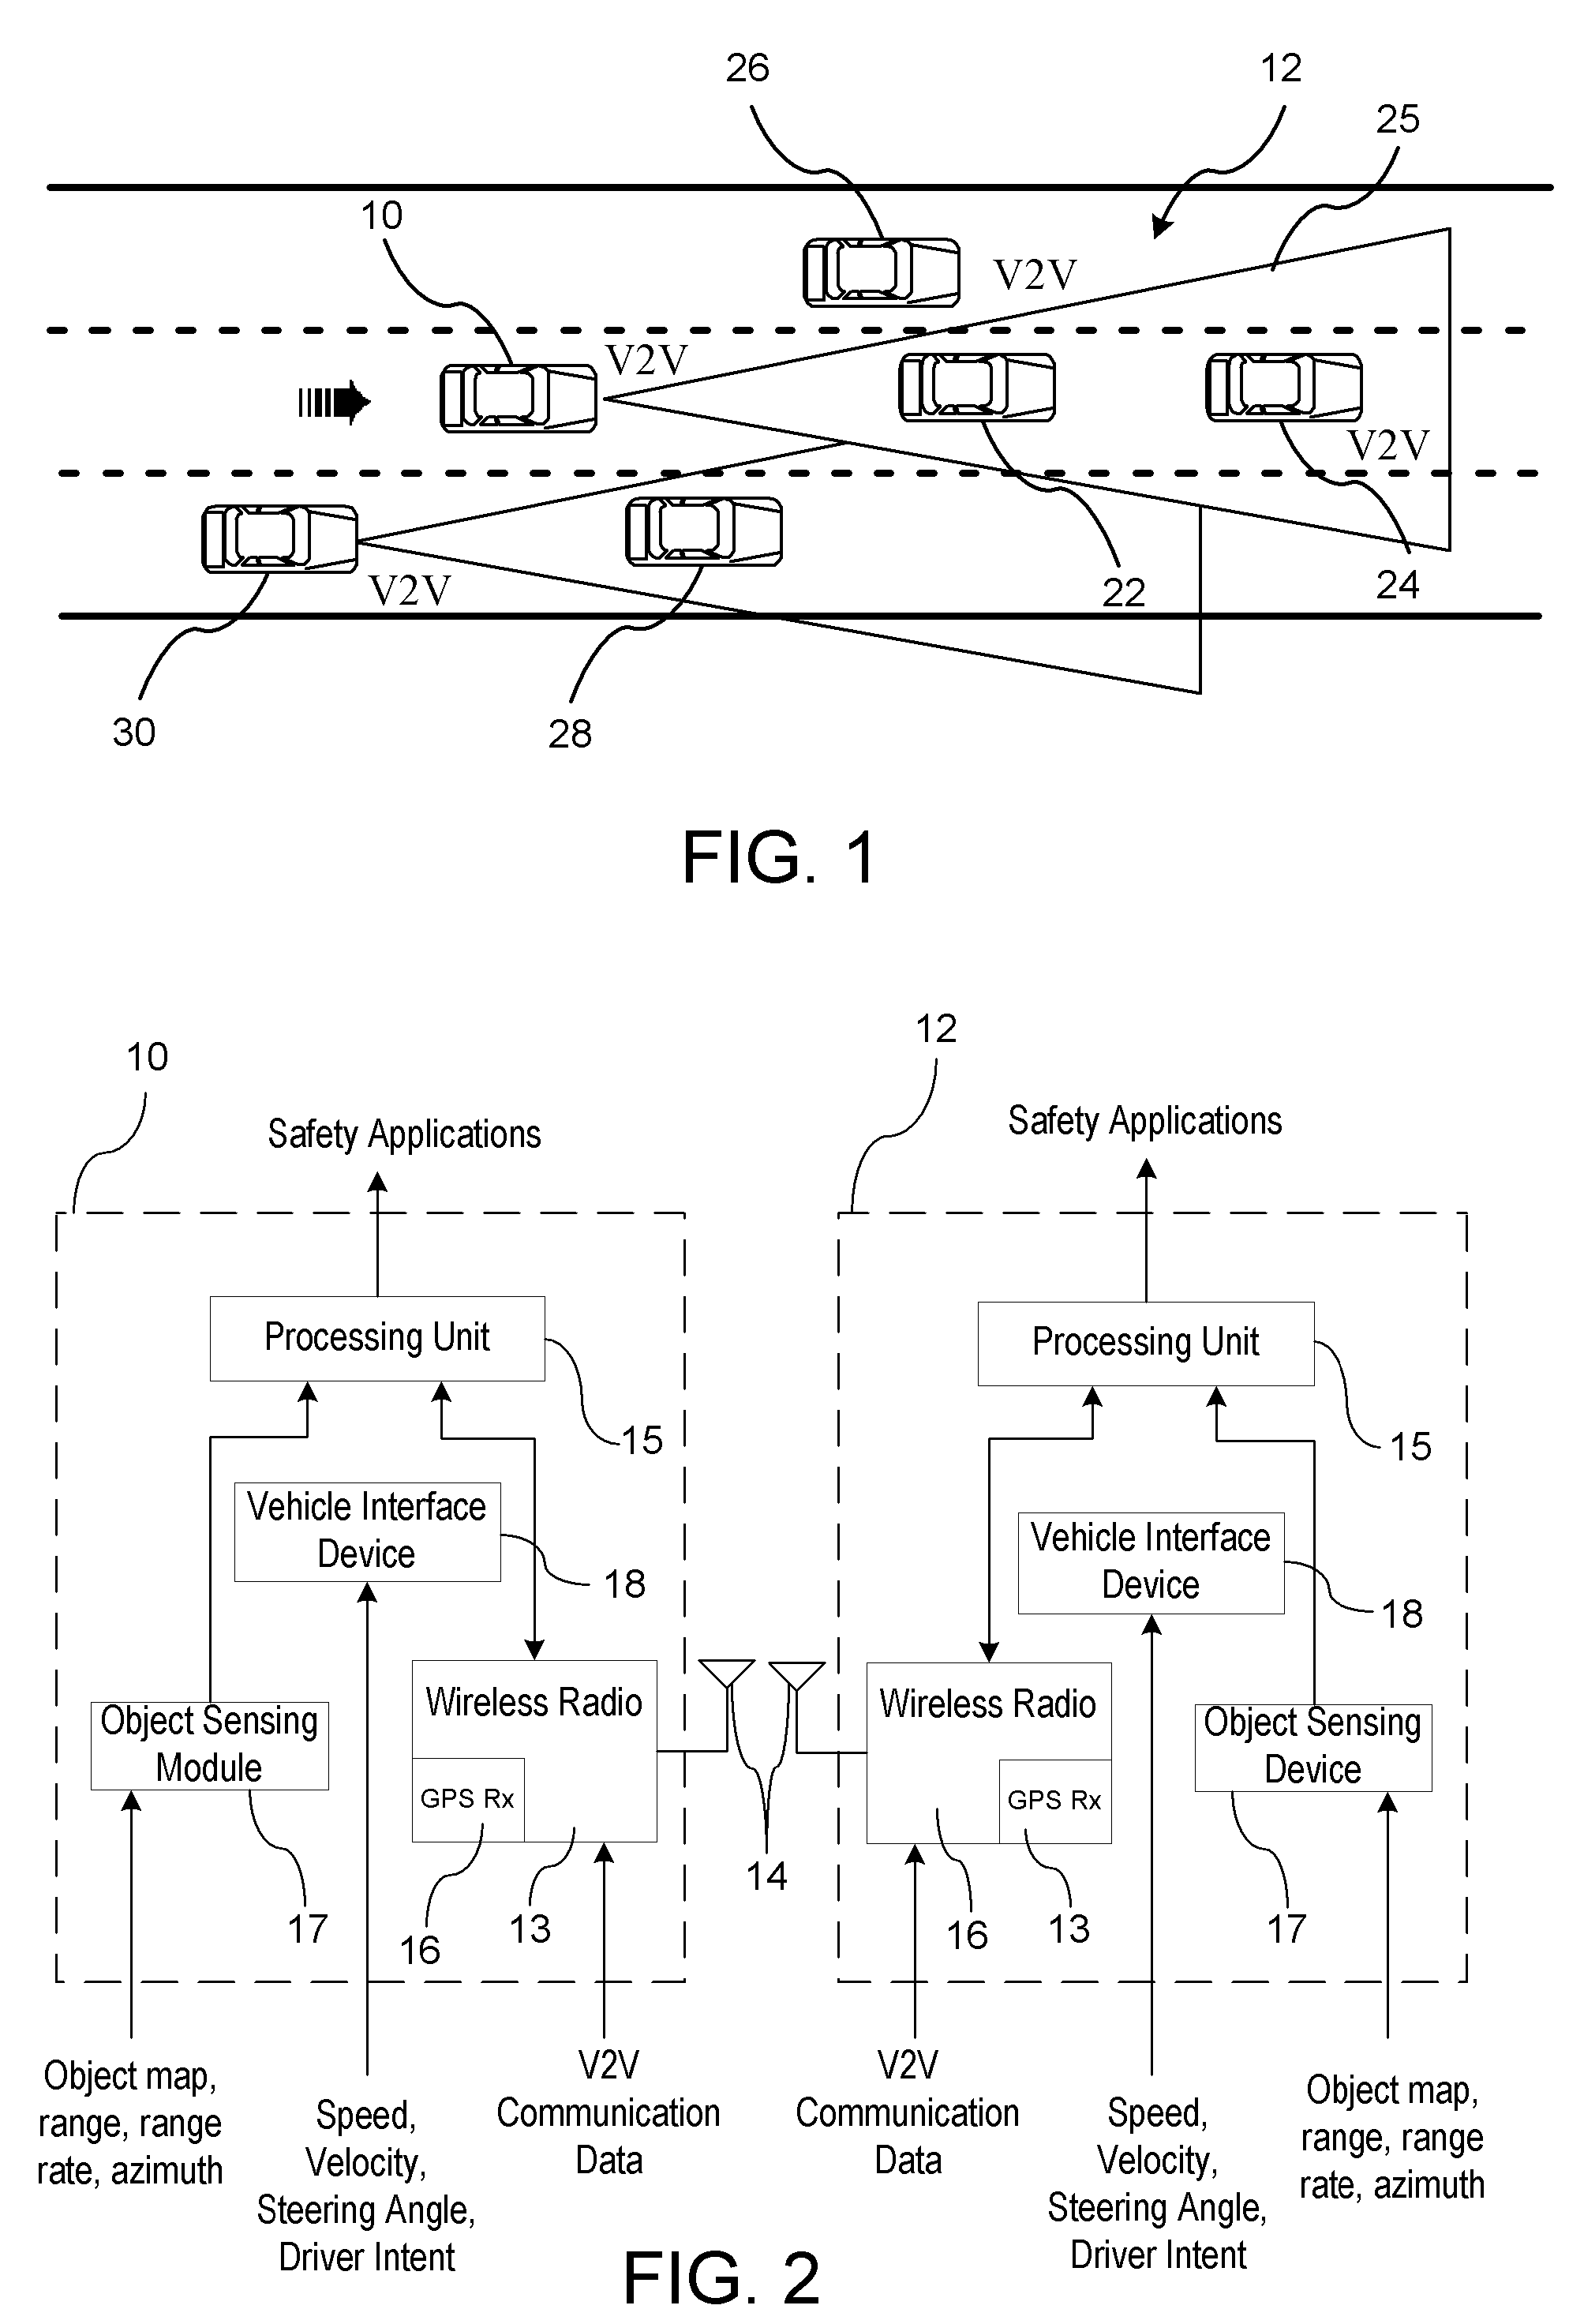 Combined Vehicle-to-Vehicle Communication and Object Detection Sensing